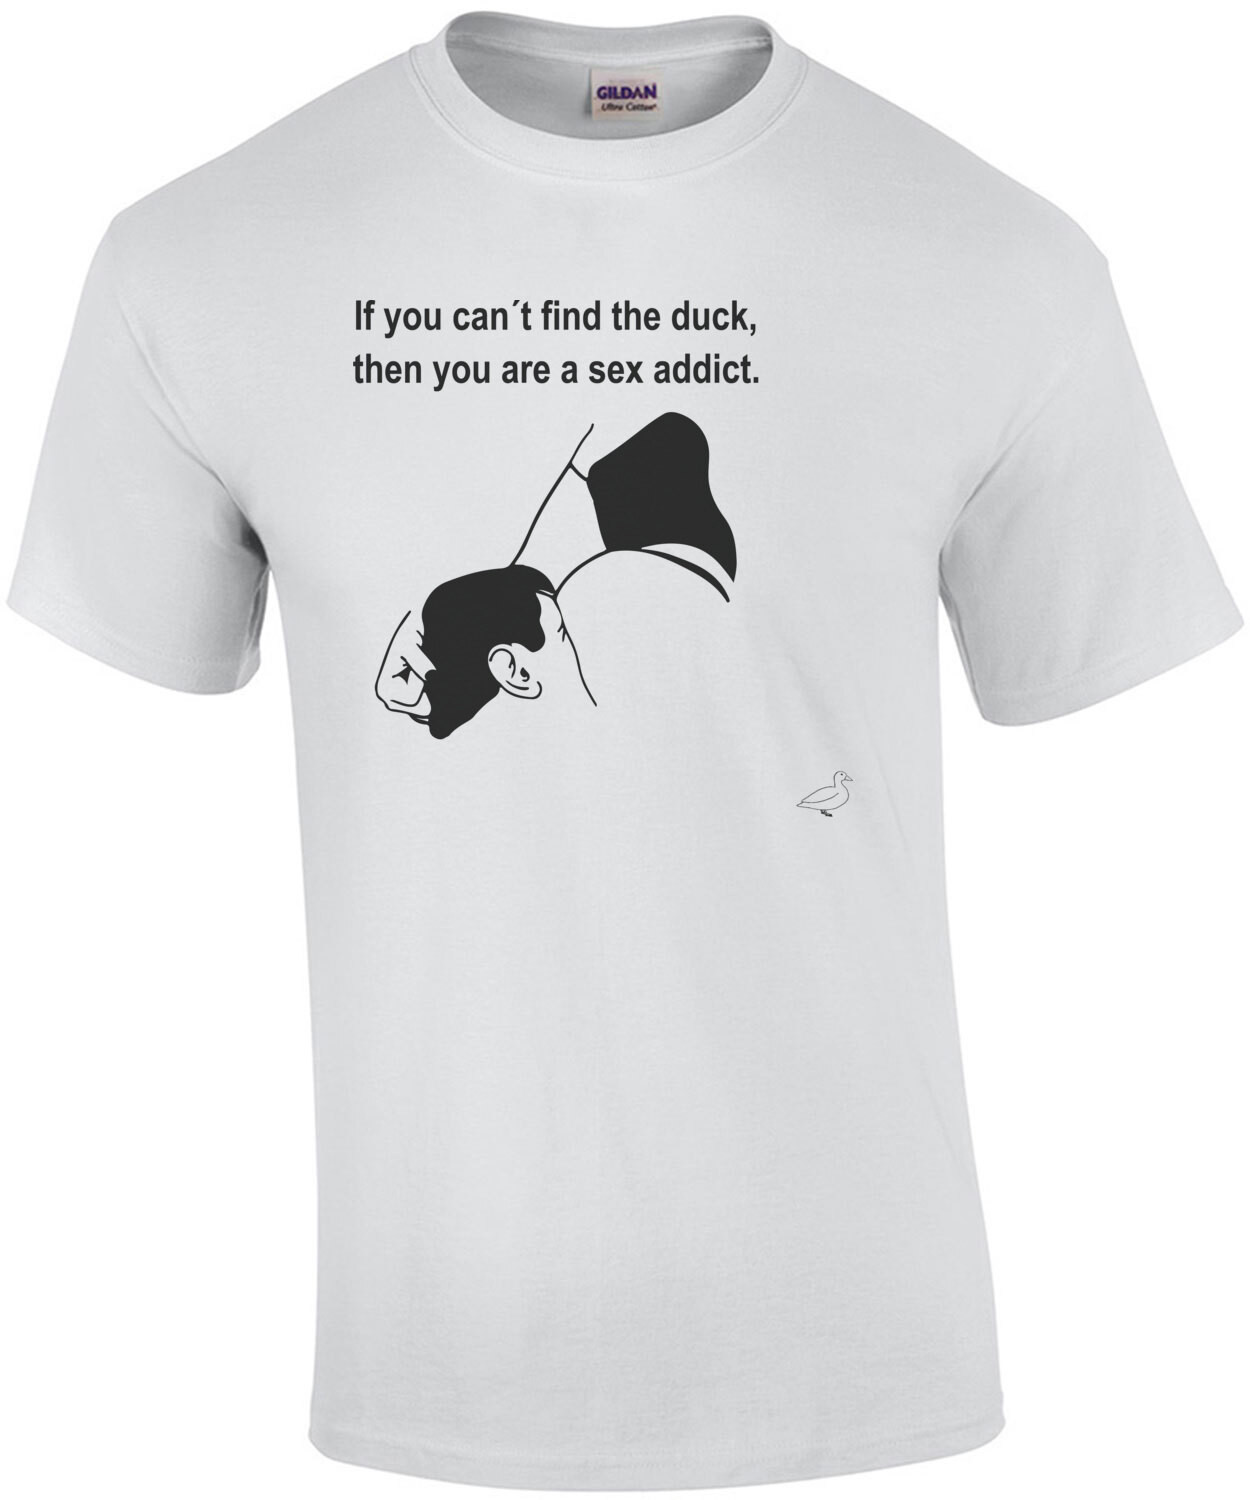 If you can't find the duck, then you are a sex addict. Funny offensive t-shirt